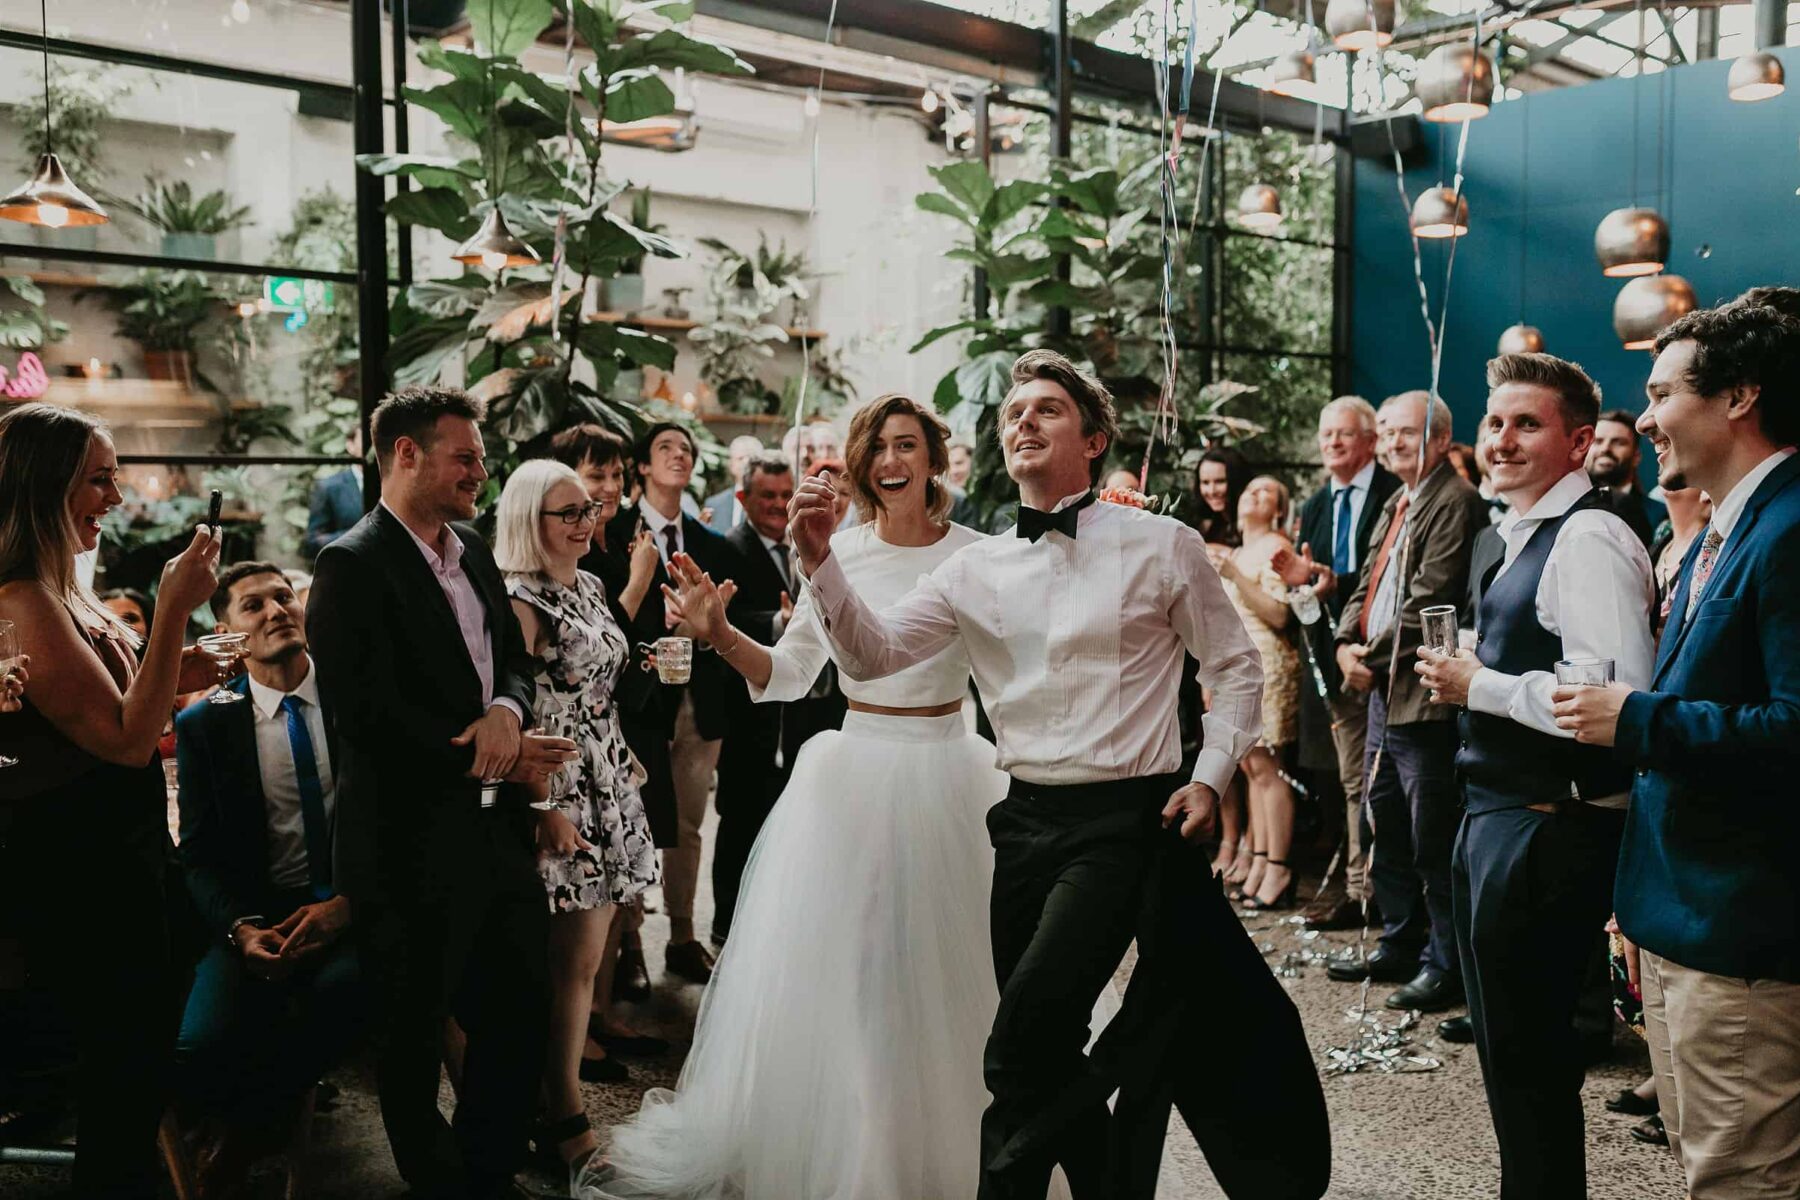 vibrant and industrial Melbourne wedding at Rupert on Rupert in Collingwood